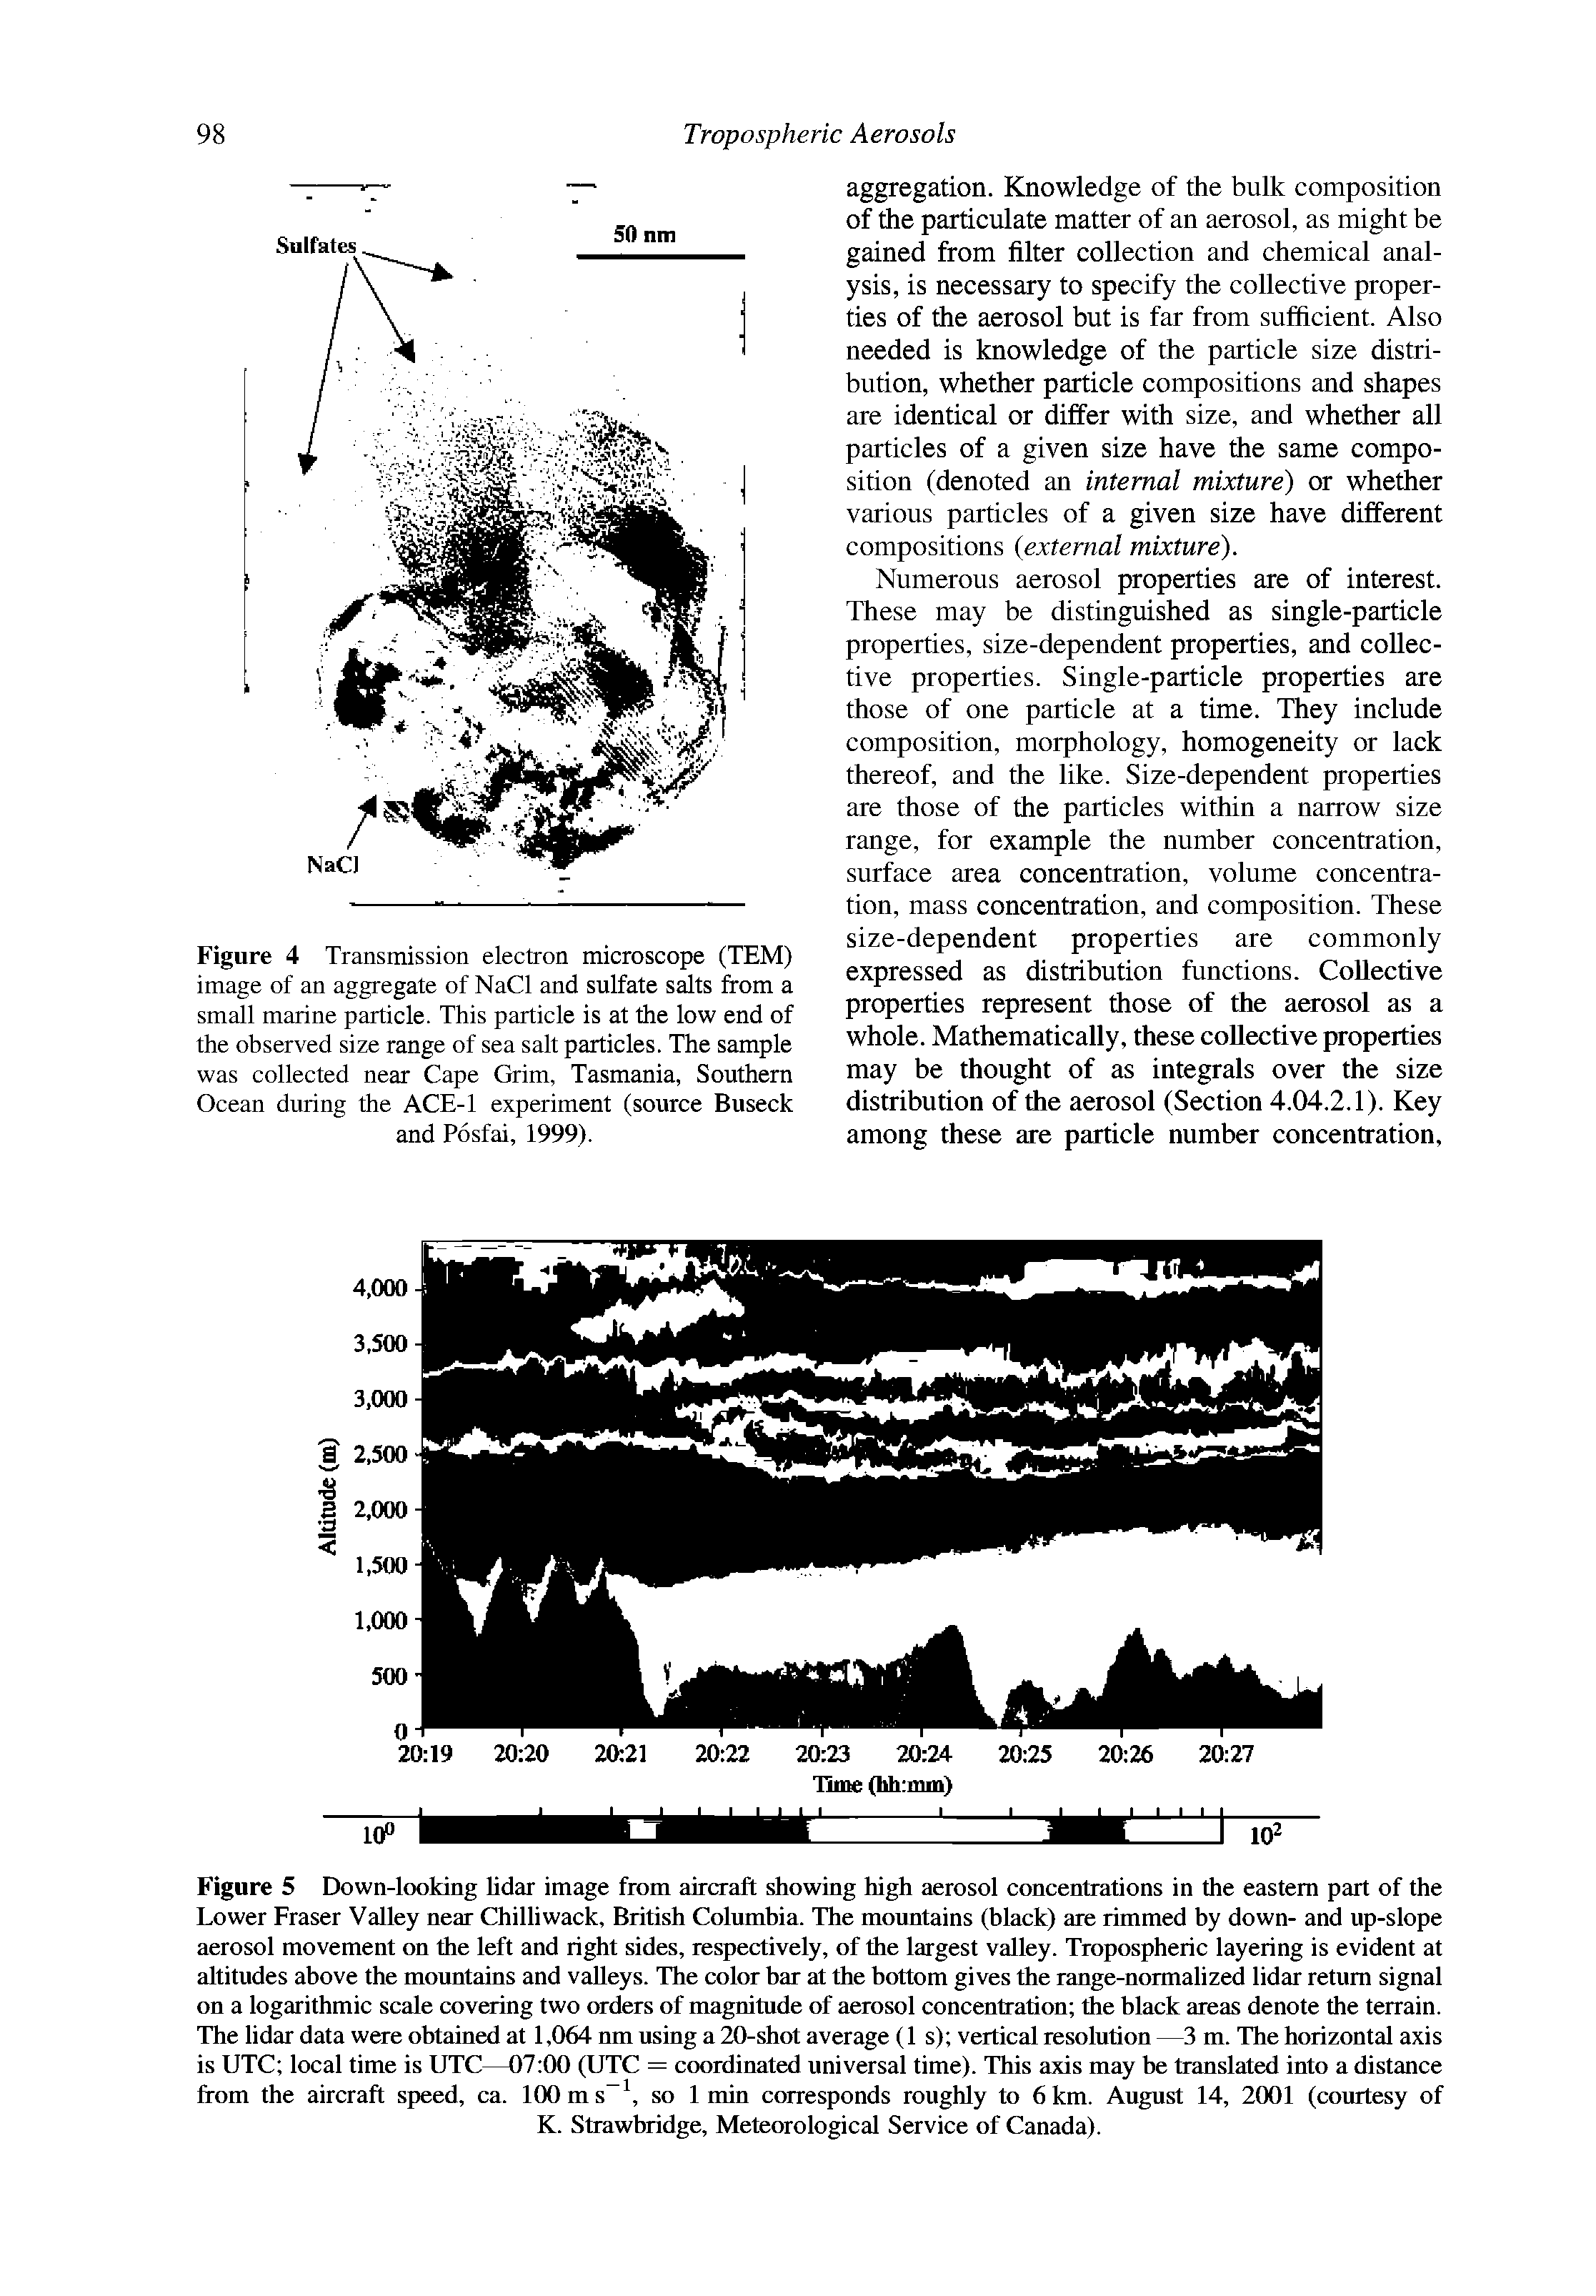 Figure 4 Transmission electron microscope (TEM) image of an aggregate of NaCl and sulfate salts from a small marine particle. This particle is at the low end of the observed size range of sea salt particles. The sample was collected near Cape Grim, Tasmania, Southern Ocean during the ACE-1 experiment (source Buseck and Posfai, 1999).